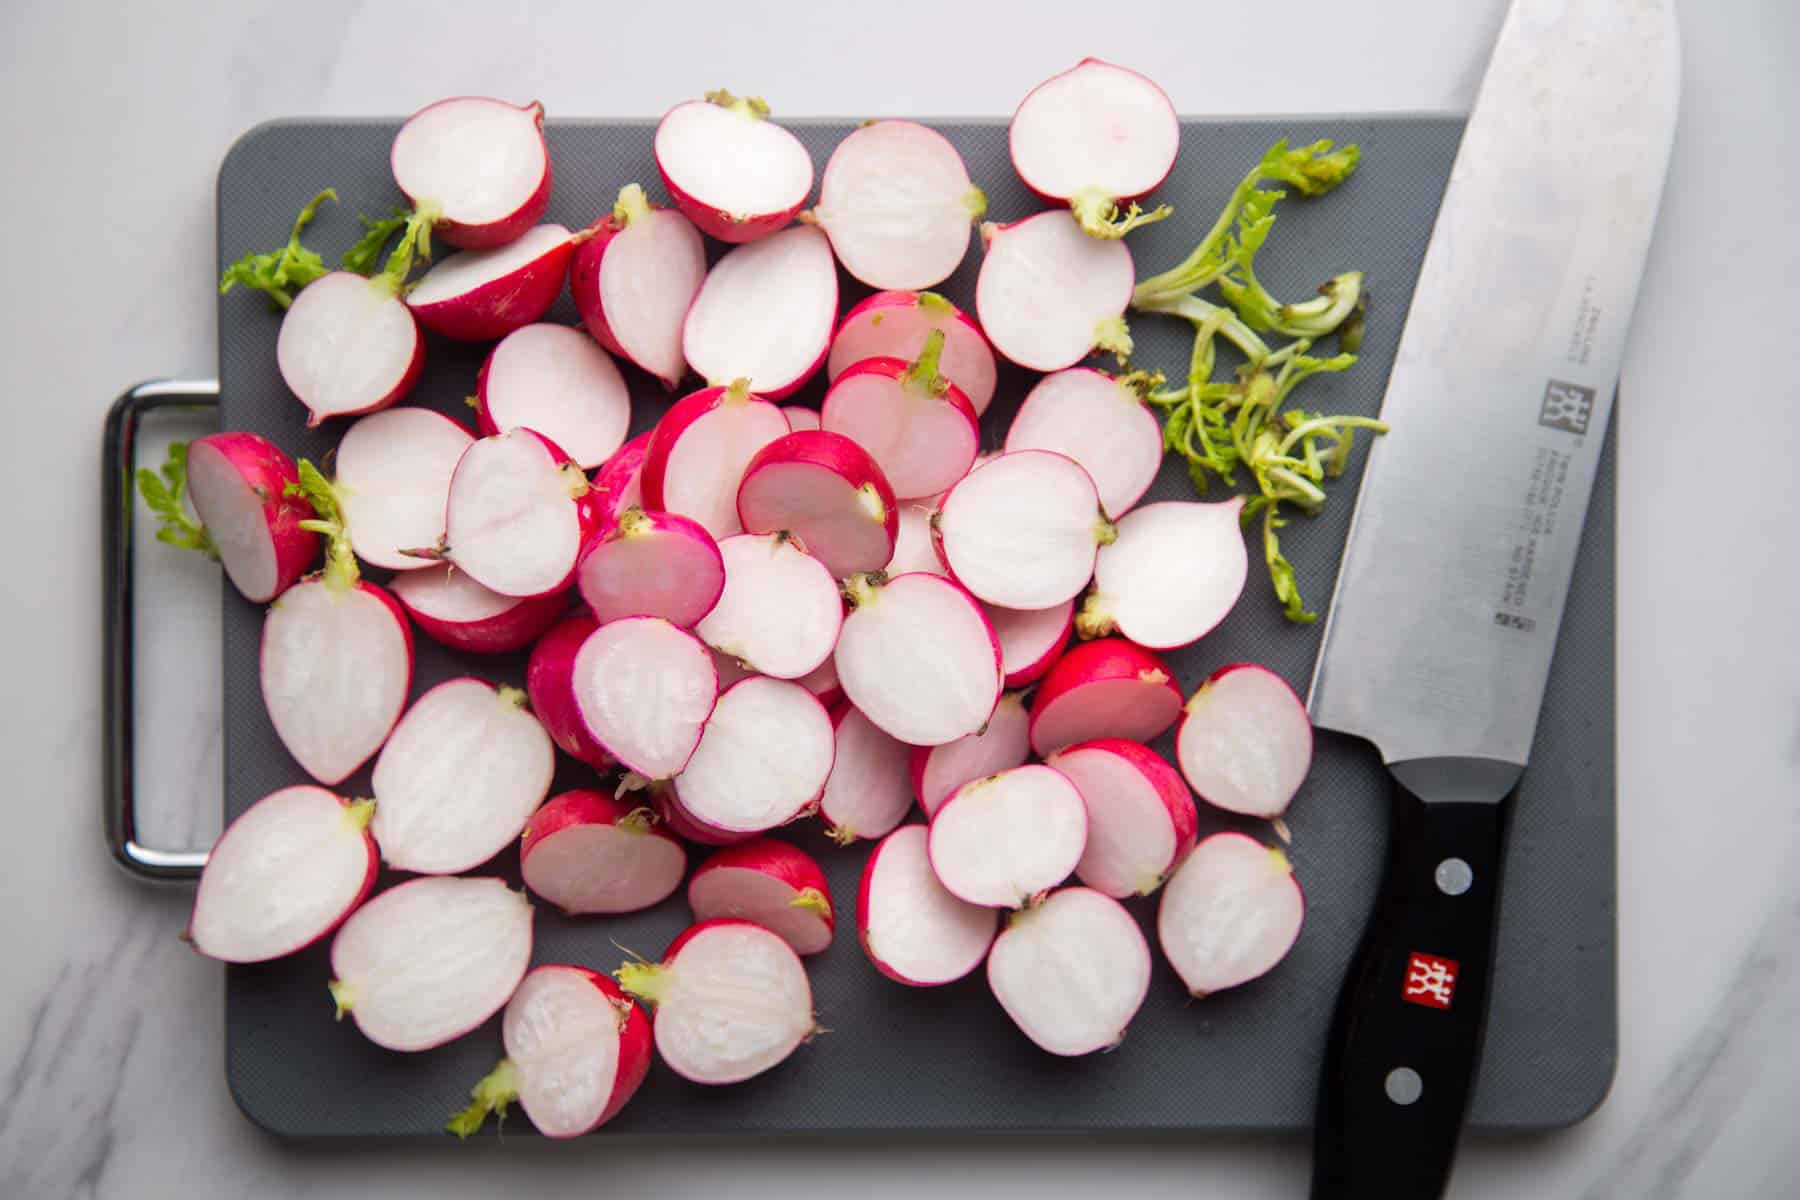 Sliced radish halves on a grey cutting board and a chef's Zwilling knife on the side